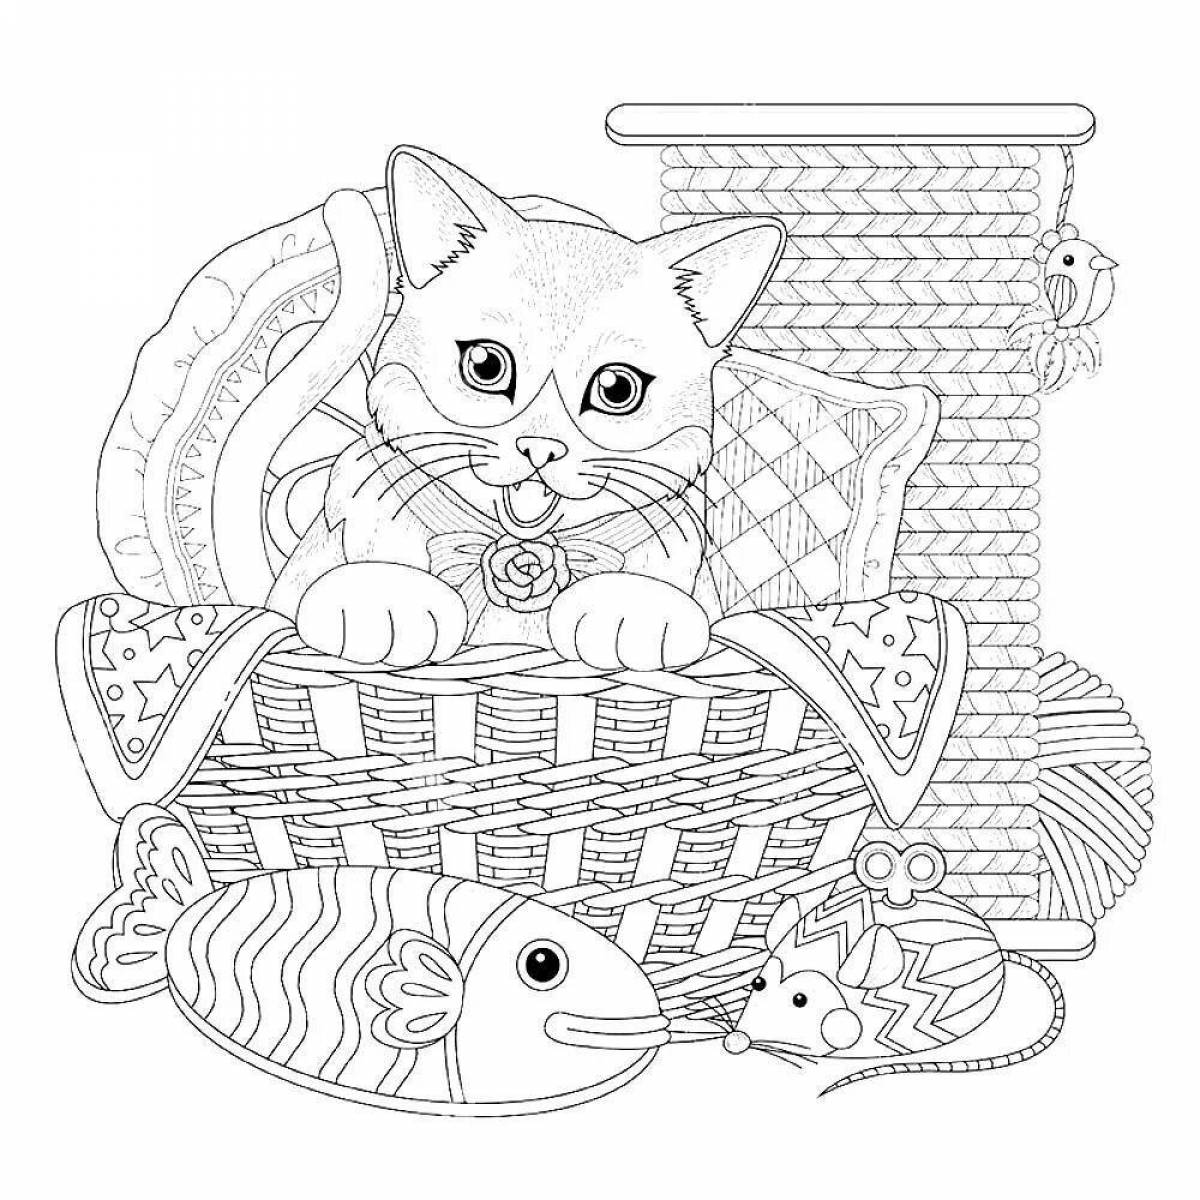 Coloring page of a cheerful kitten in a mug